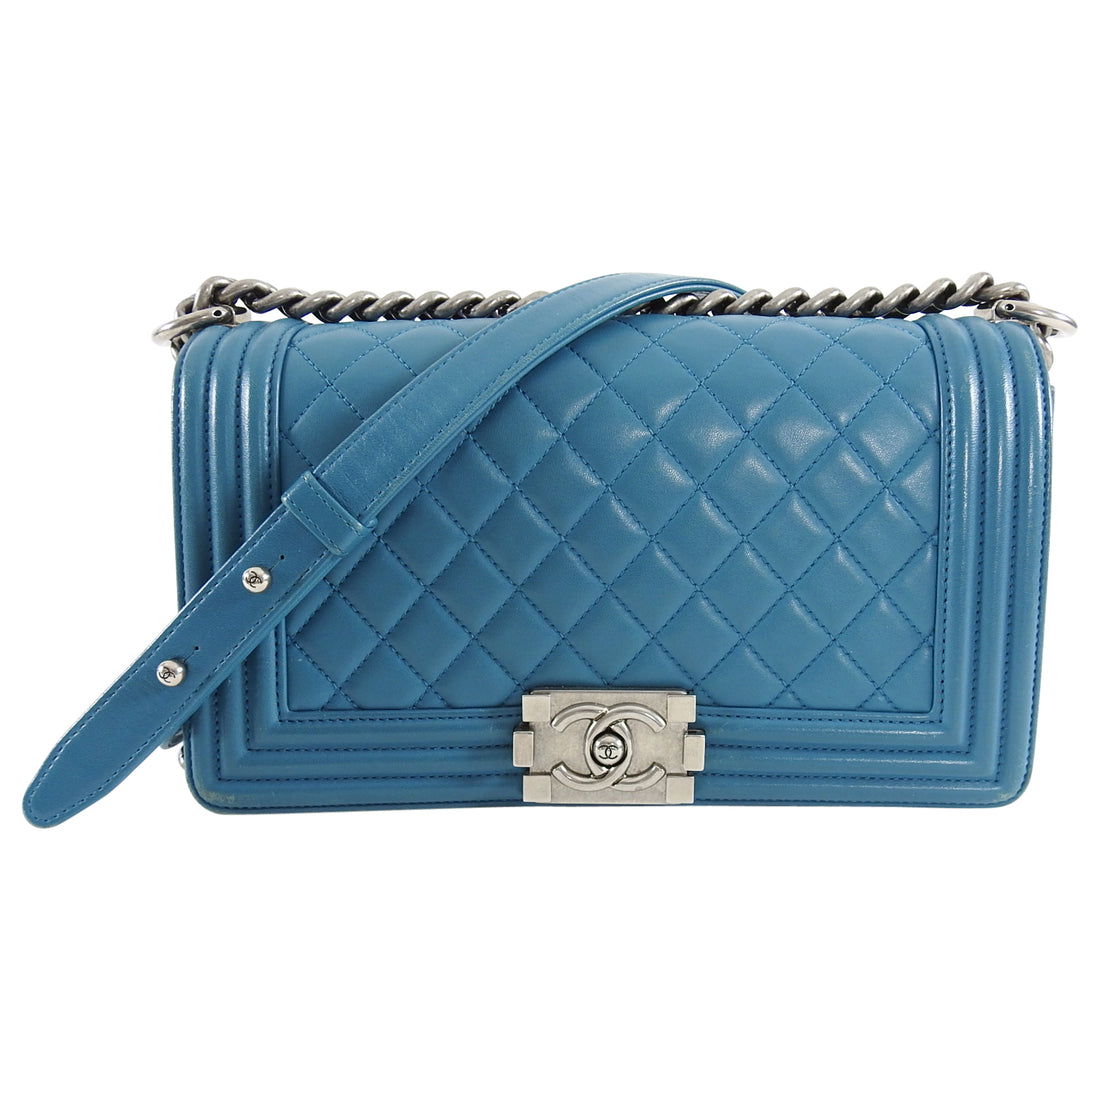 Chanel Turquoise Quilted Caviar Leather Medium Boy Bag Chanel